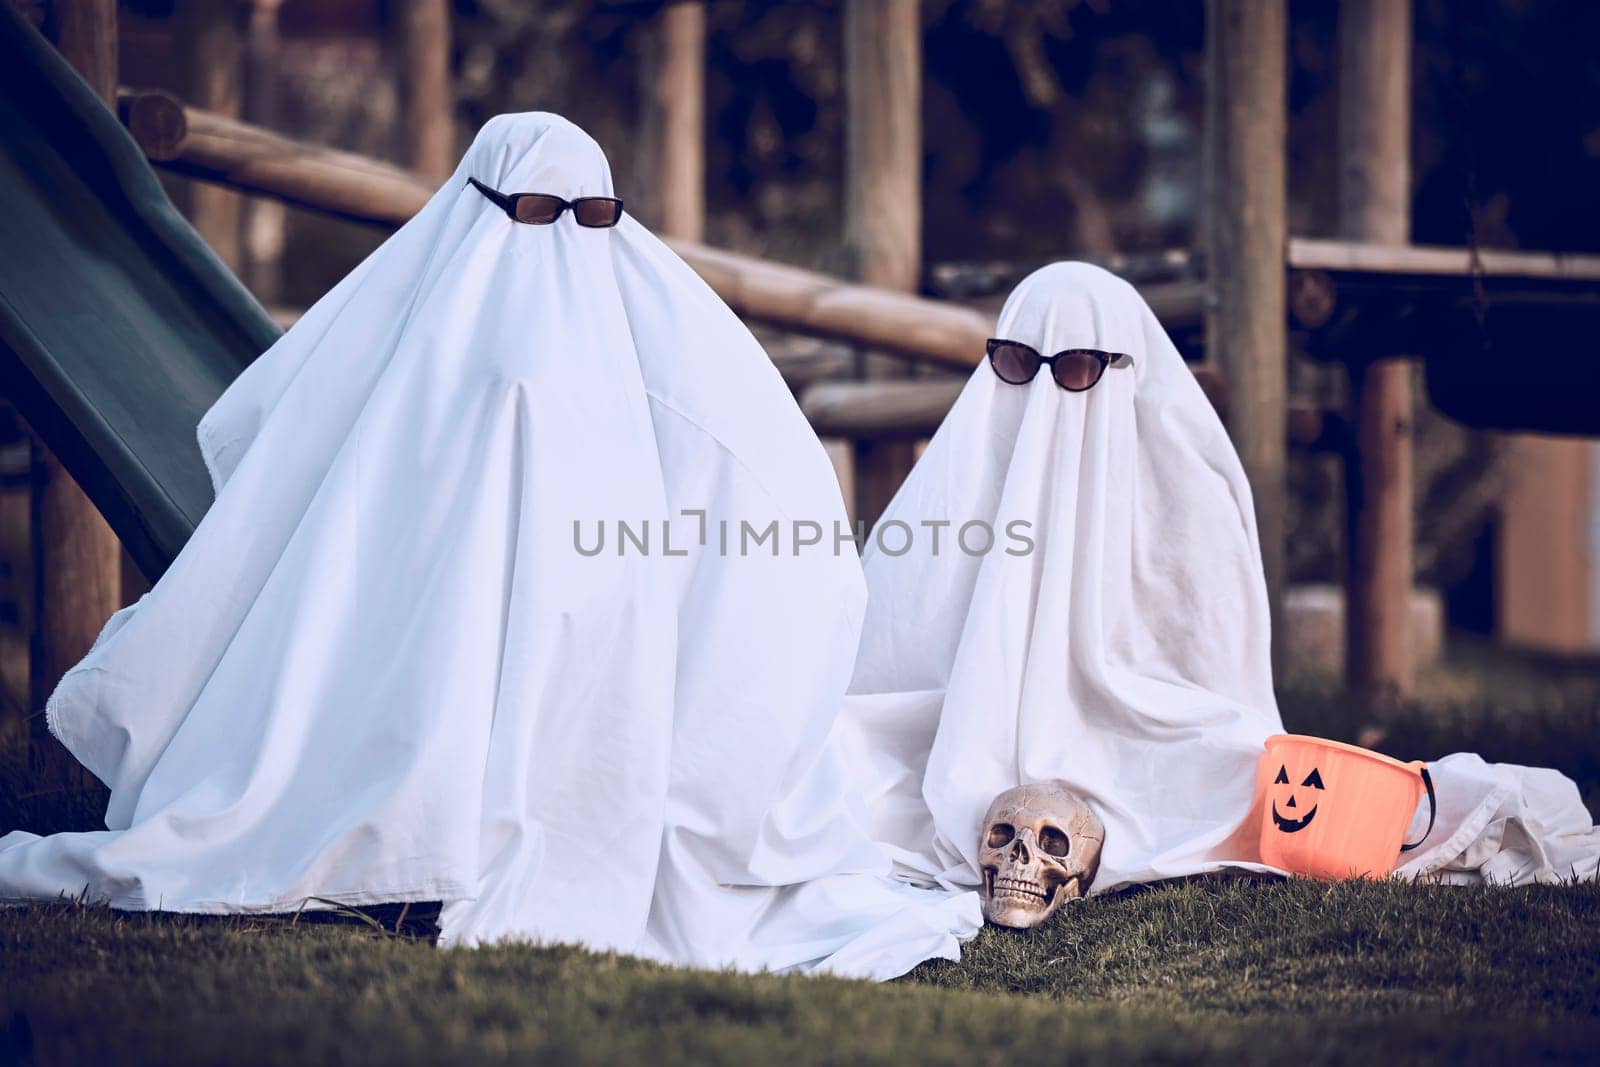 Halloween, glasses and people in ghost costume for trick or treat, global dress up day or fun on playground grass field. Fear fantasy, horror and relax friends role play scary phantom monster at park.